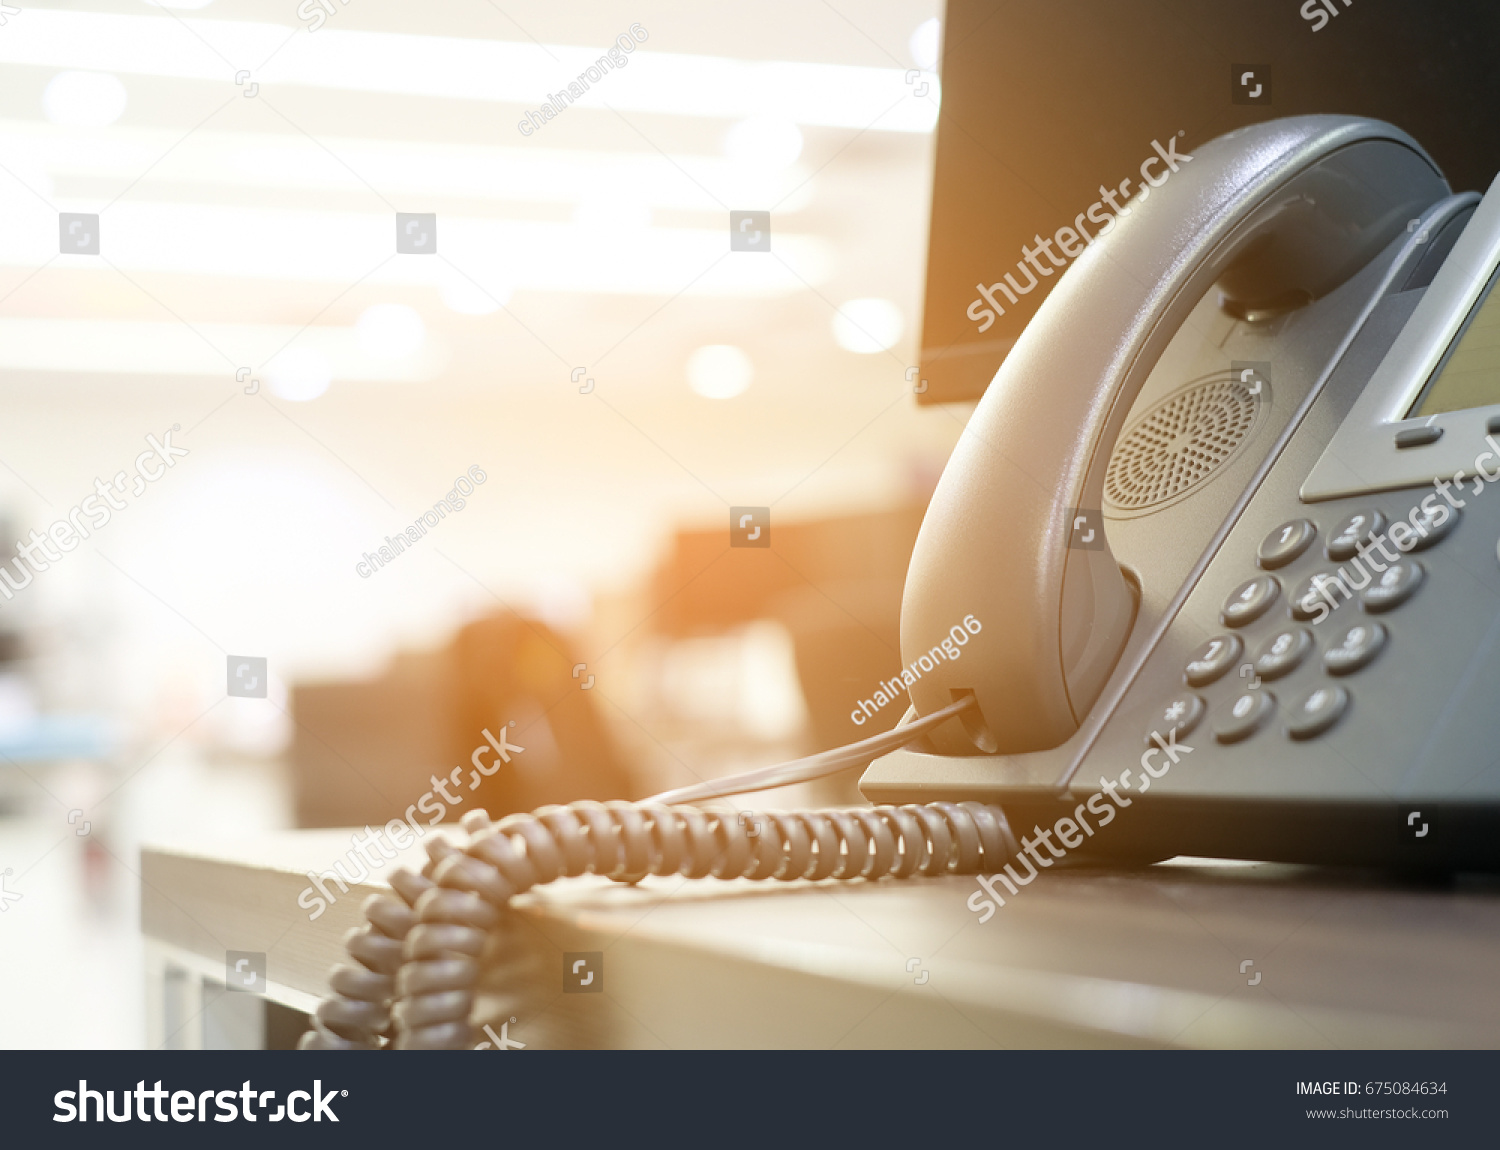 close up soft focus on telephone devices at office desk with light effect,communication technology concept #675084634